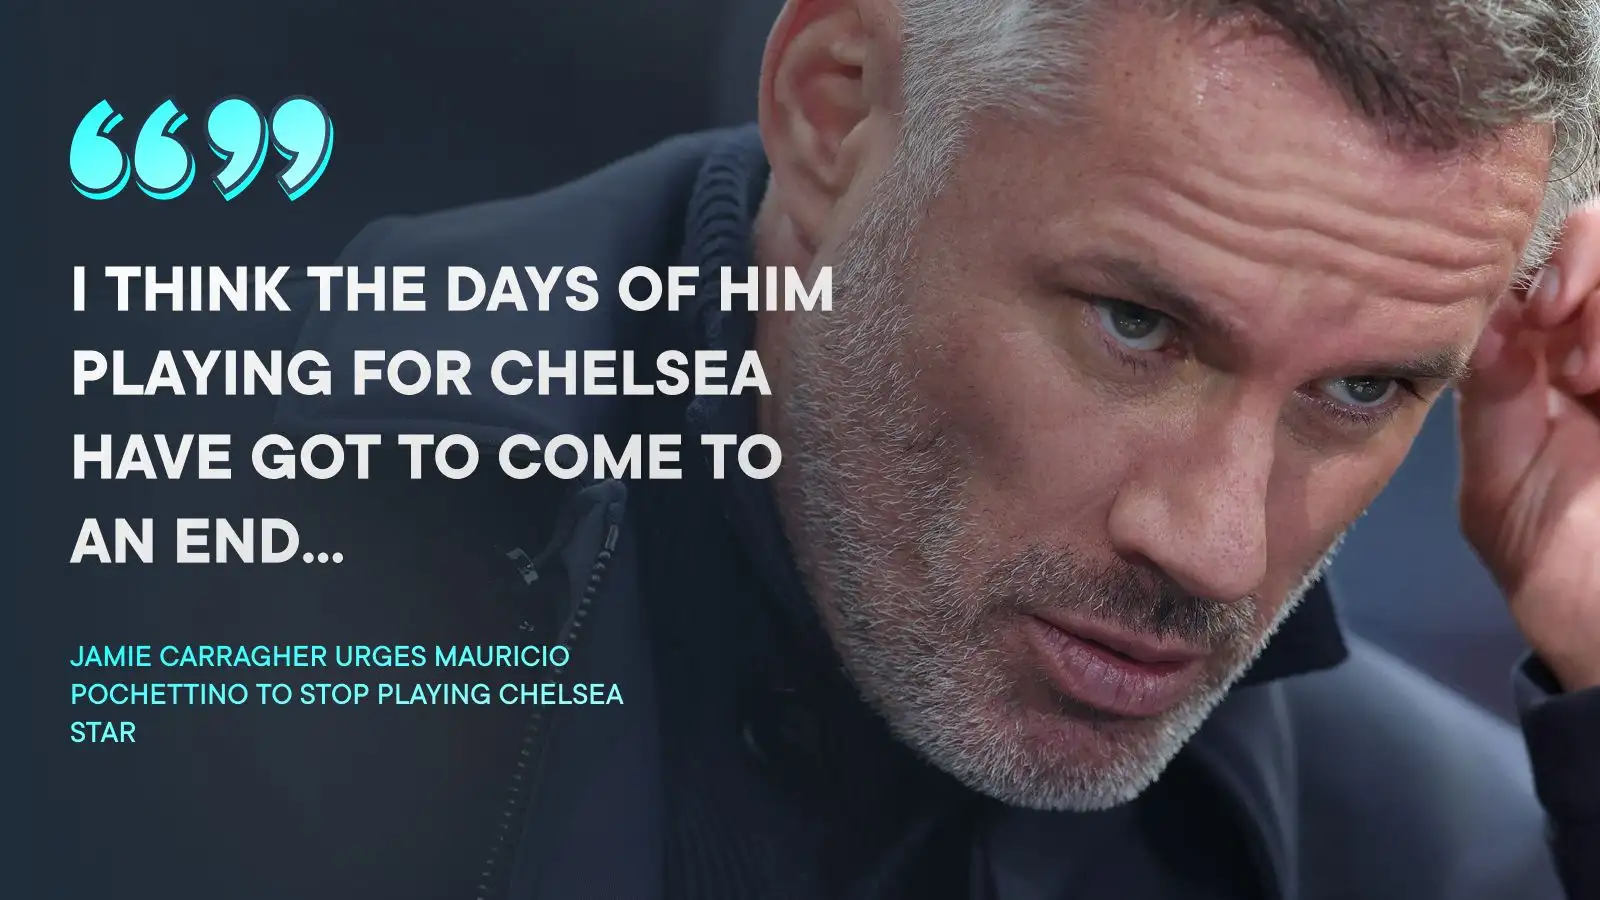 Carragher on Chelsea